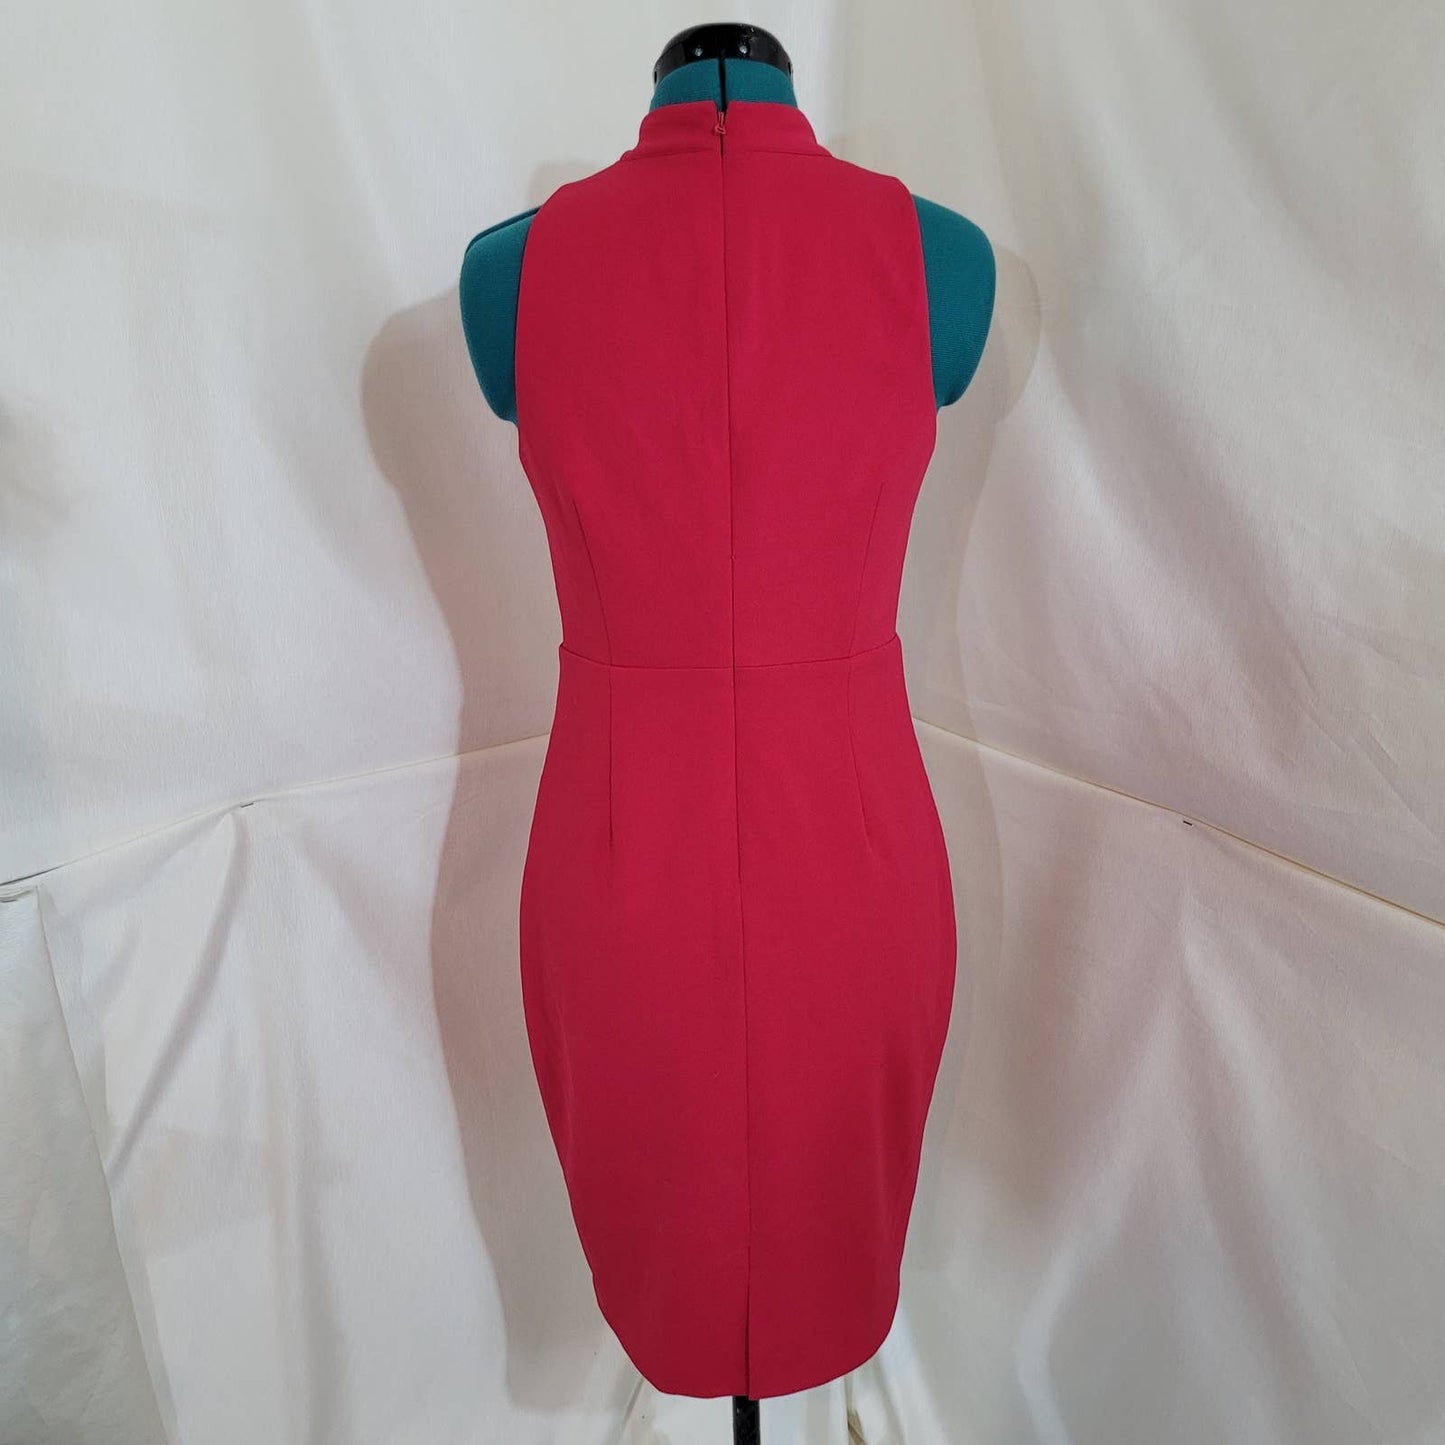 Guess Pinkish Red Fitted Dress with High Keyhole Neckline - Size 6Markita's ClosetGUESS